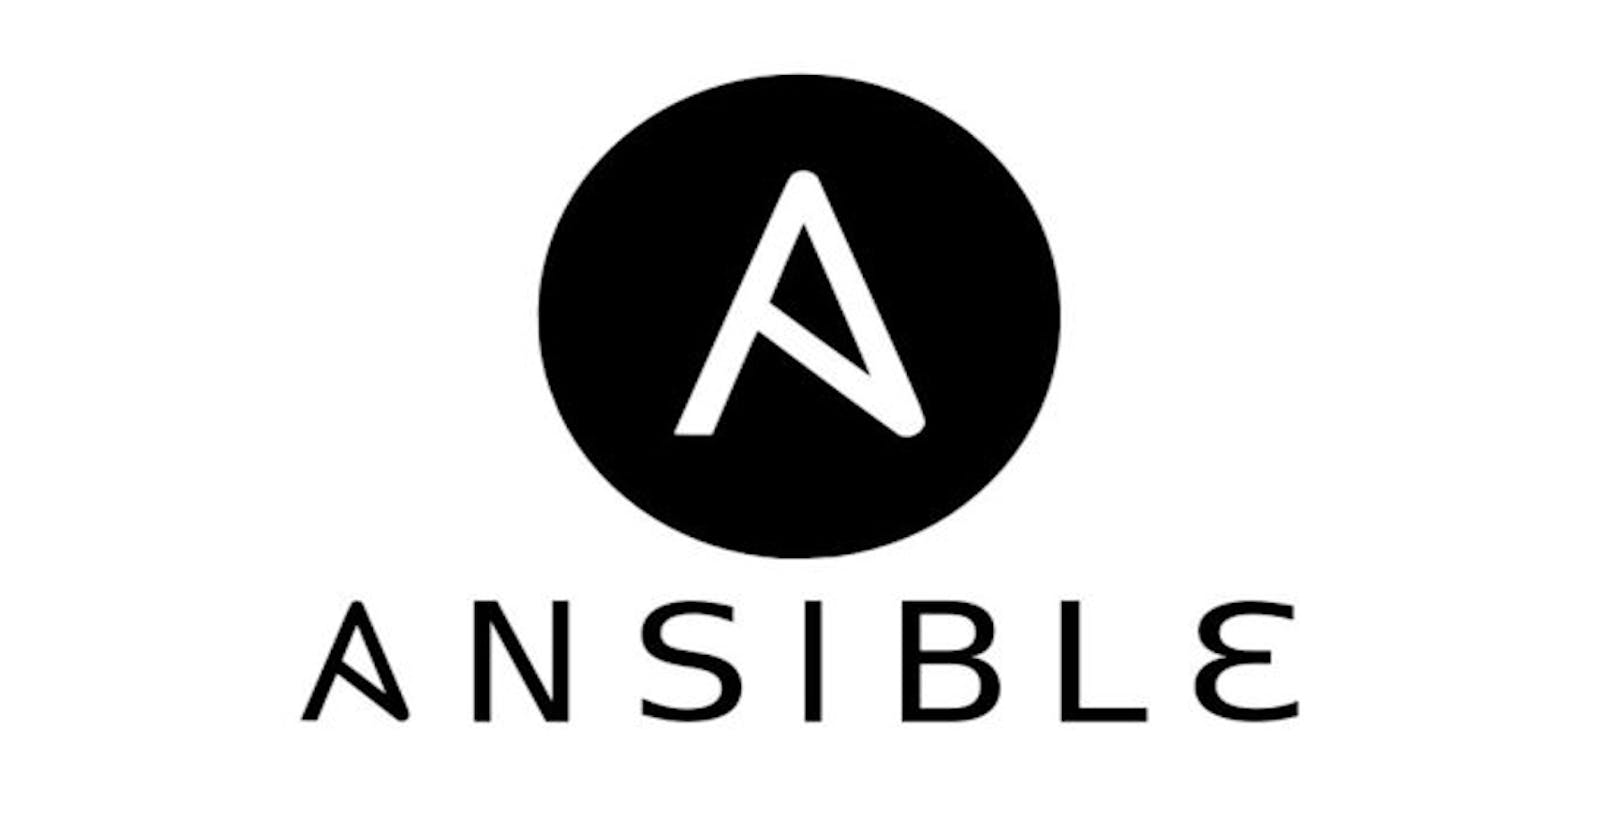 What is Ansible and how it is different from other configuration management tools?